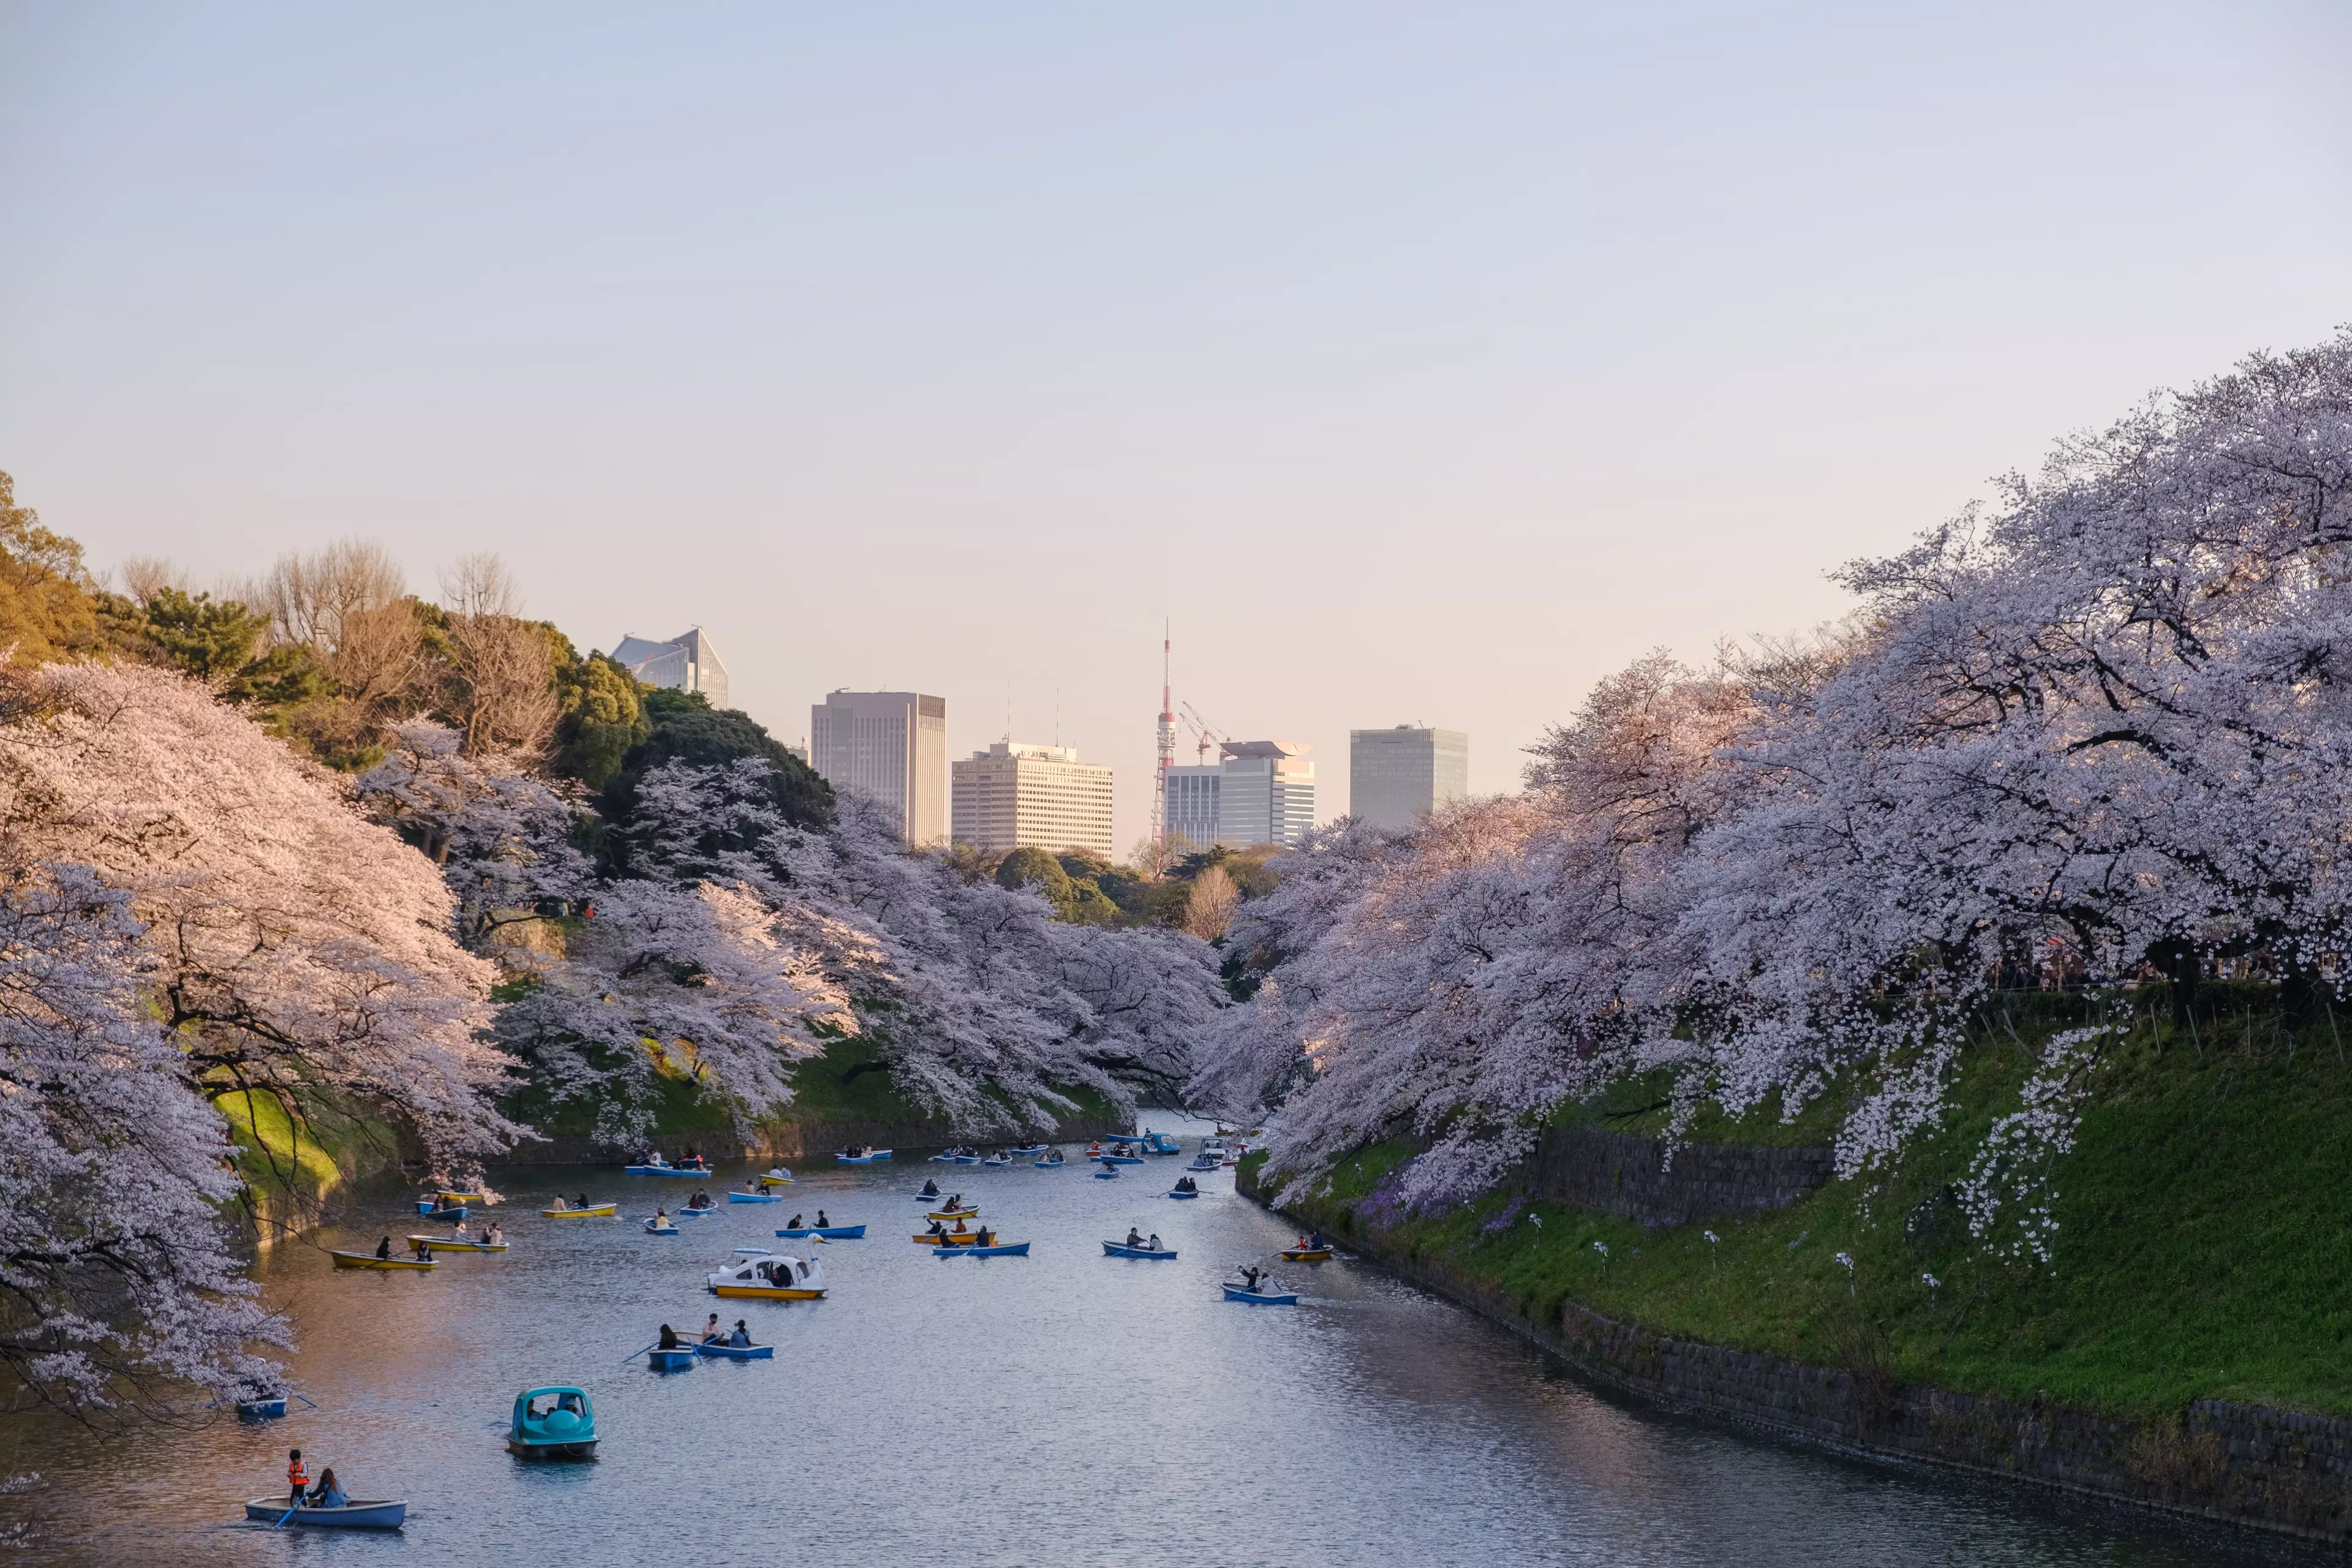 As a travel tester you'd be reviewing sights like Japan's iconic cherry blossoms via Google Earth (